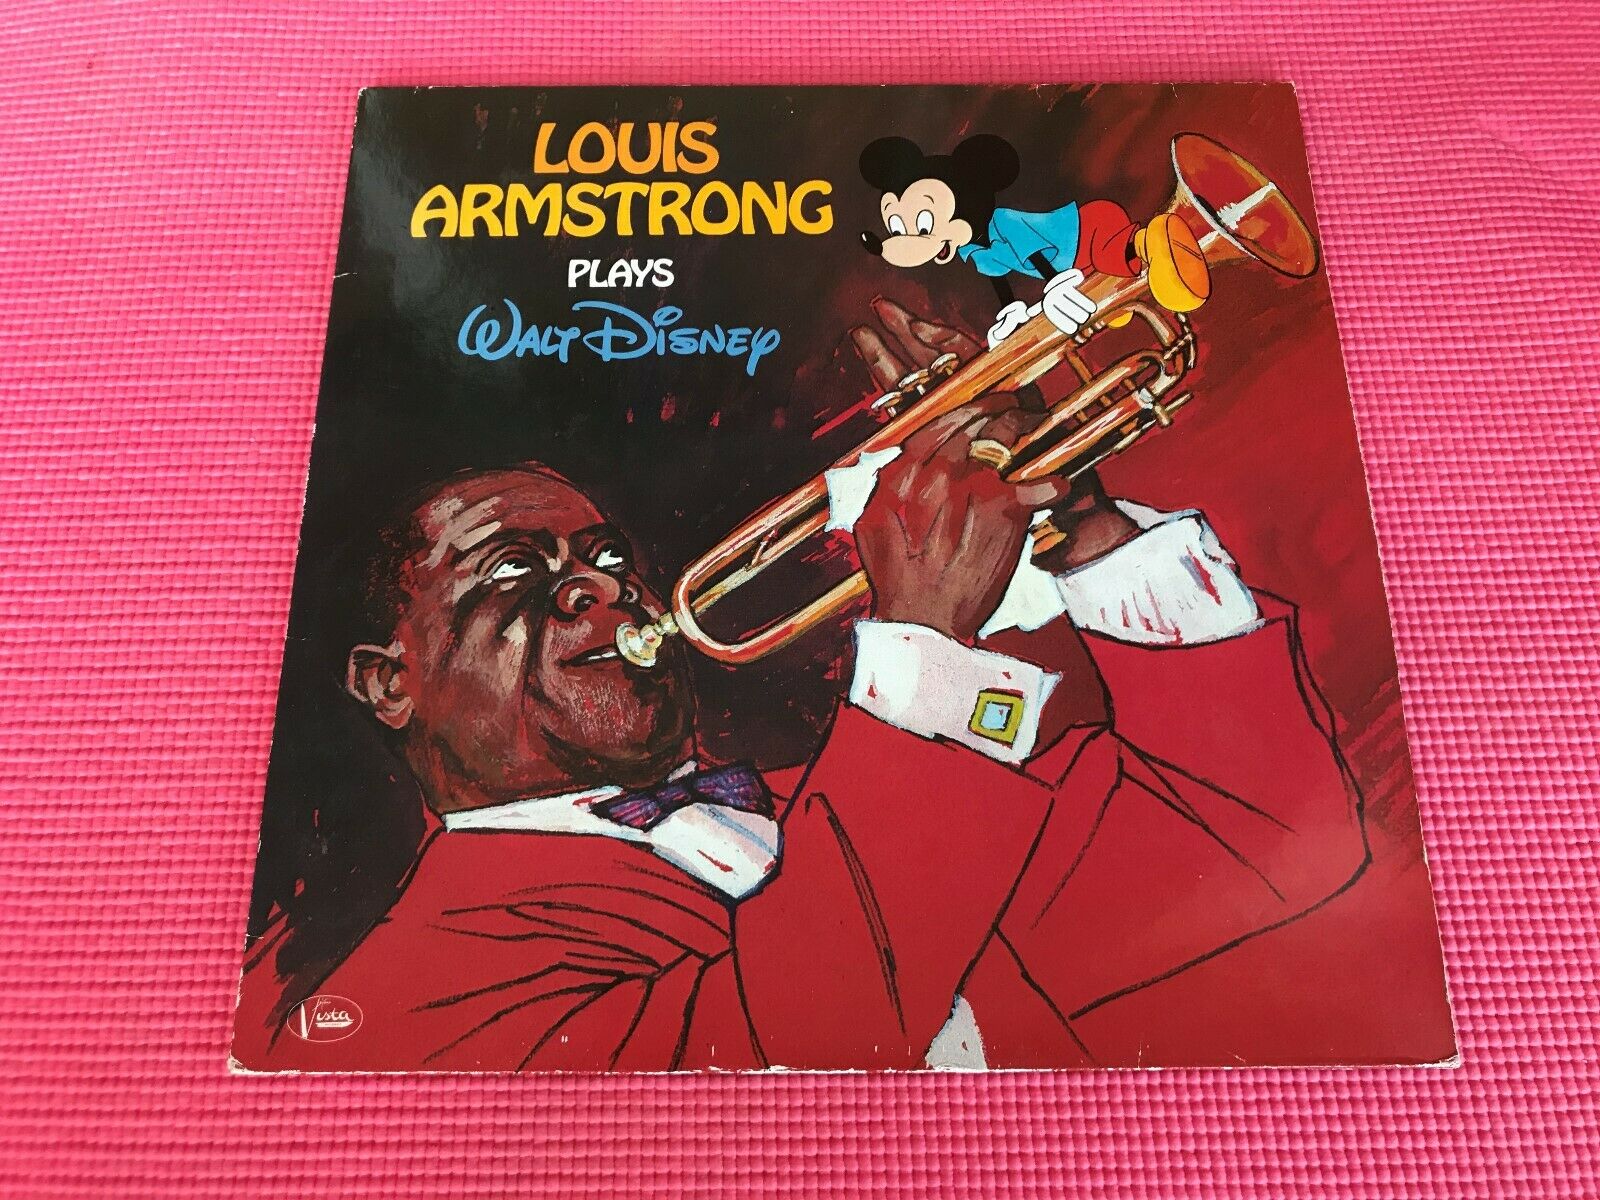 Pic 1 LOUIS ARMSTRONG - Louis armstrong plays walt disney LP 1980 - GERMANY Jazz KULT